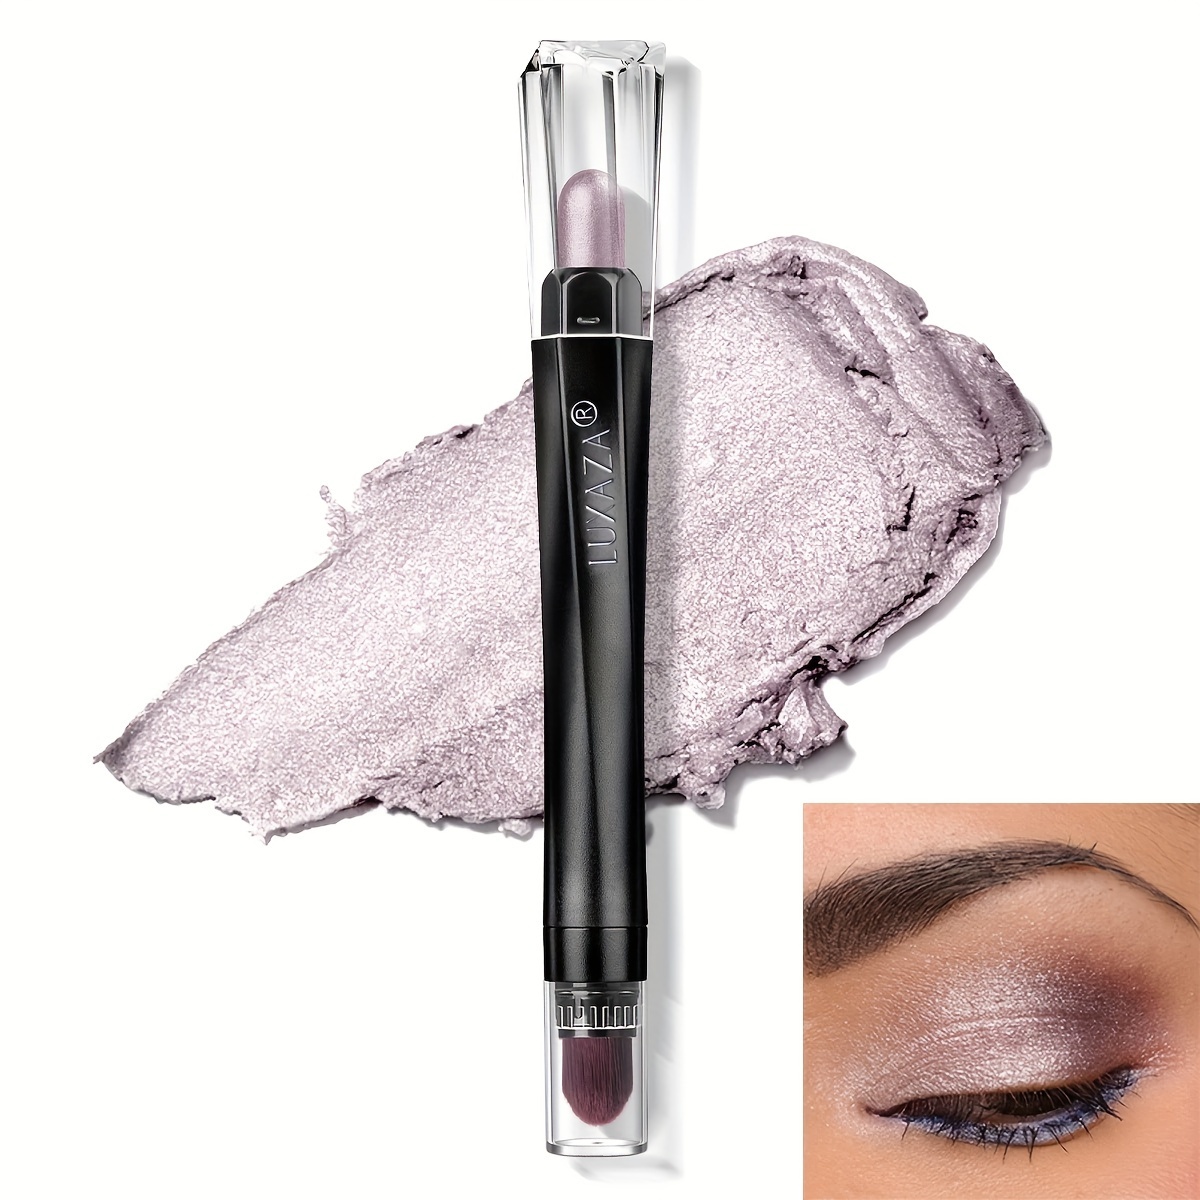 

Magic Color Eyeshadow Stick-#81-clay Pearlescent Glitter Light Purple Eyeshadow Highly Pigment Long Lasting Monochrome Eye Makeup